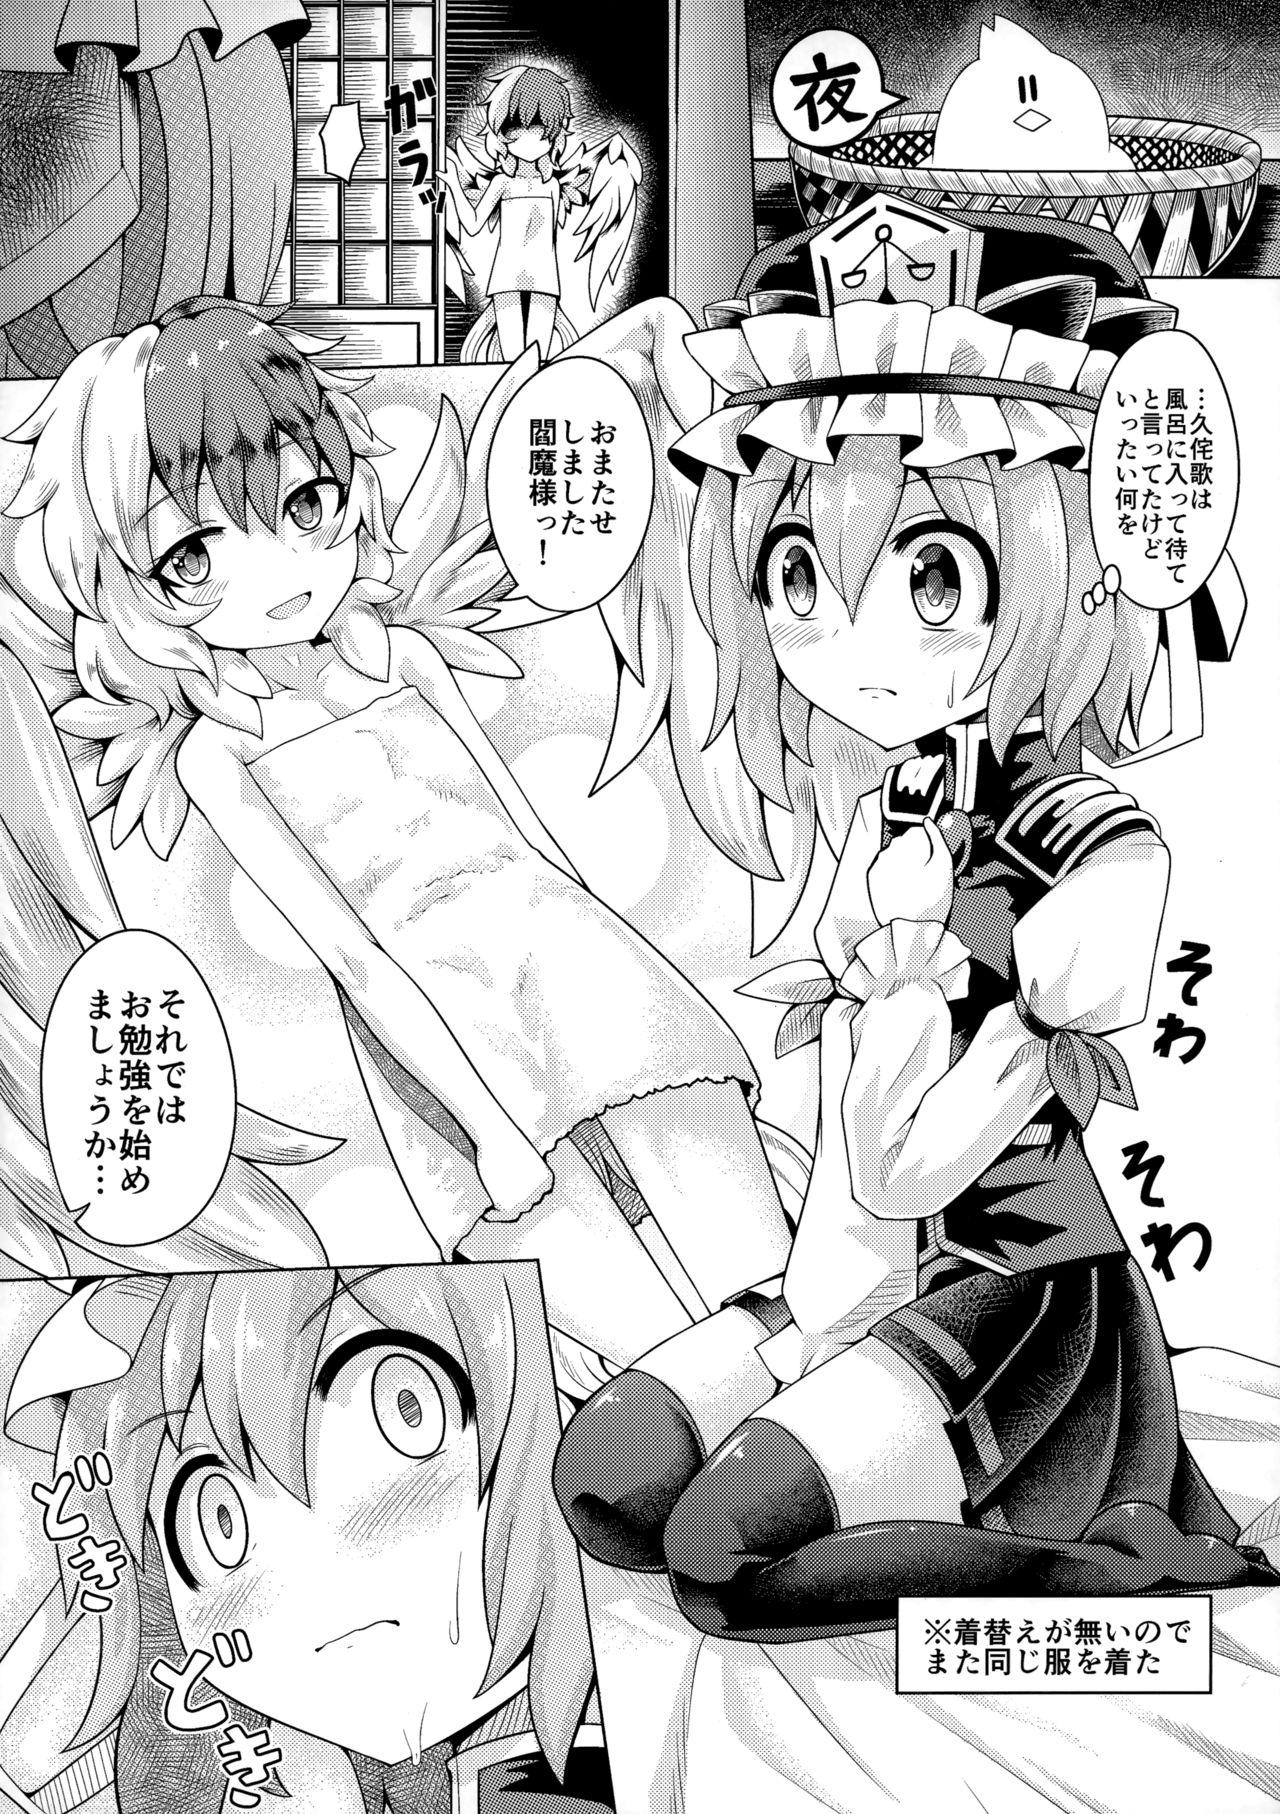 Spread Reverse Sexuality 9 - Touhou project Gay Rimming - Page 5